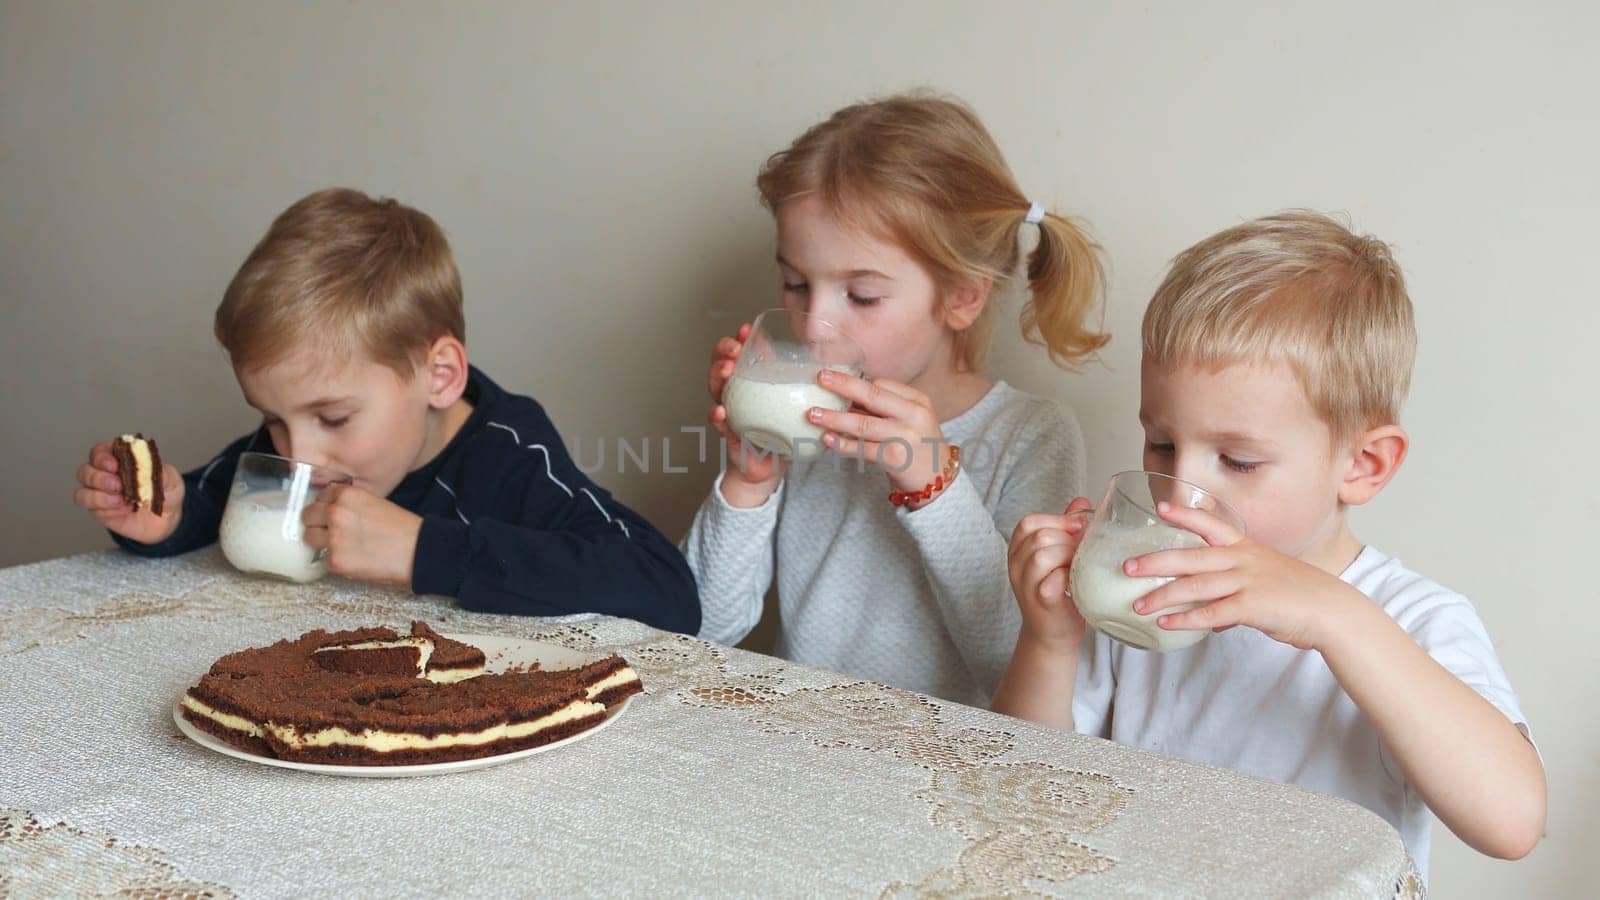 Children at the table eat milk and cookies